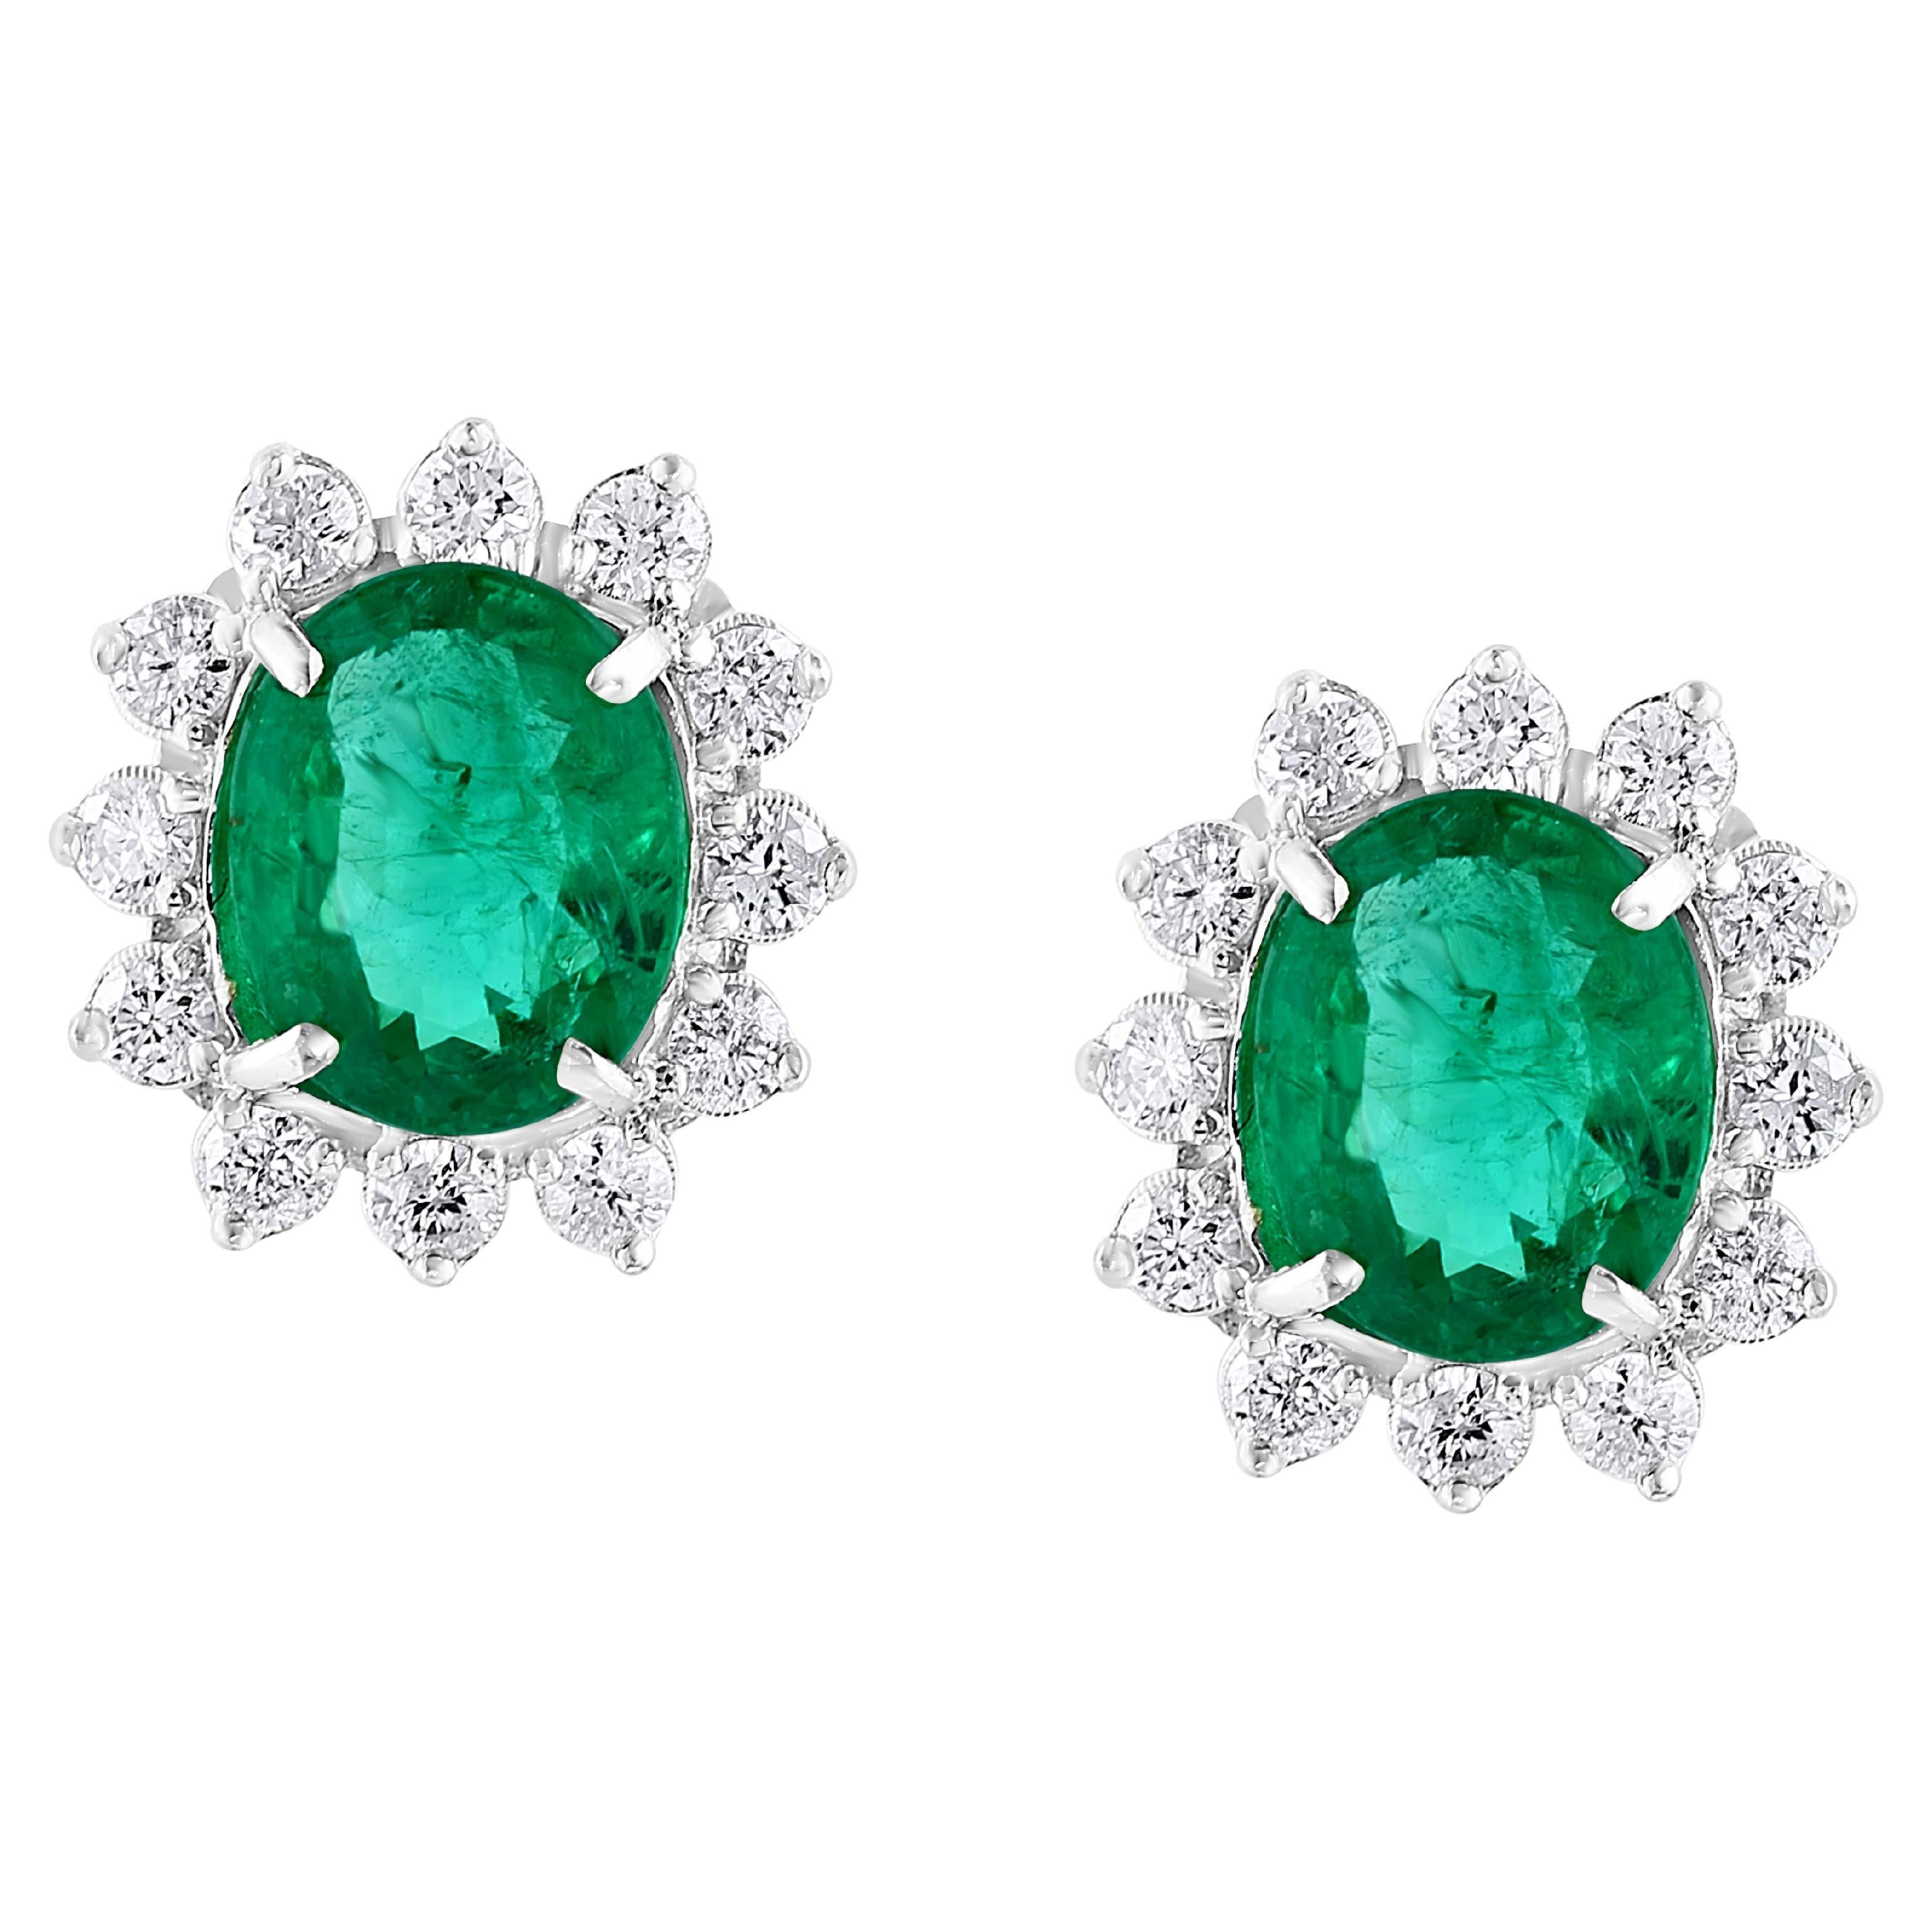 8 Ct Oval Colombian Emerald & 2.5 Ct Diamond Post Back Earrings 18 Kt White Gold